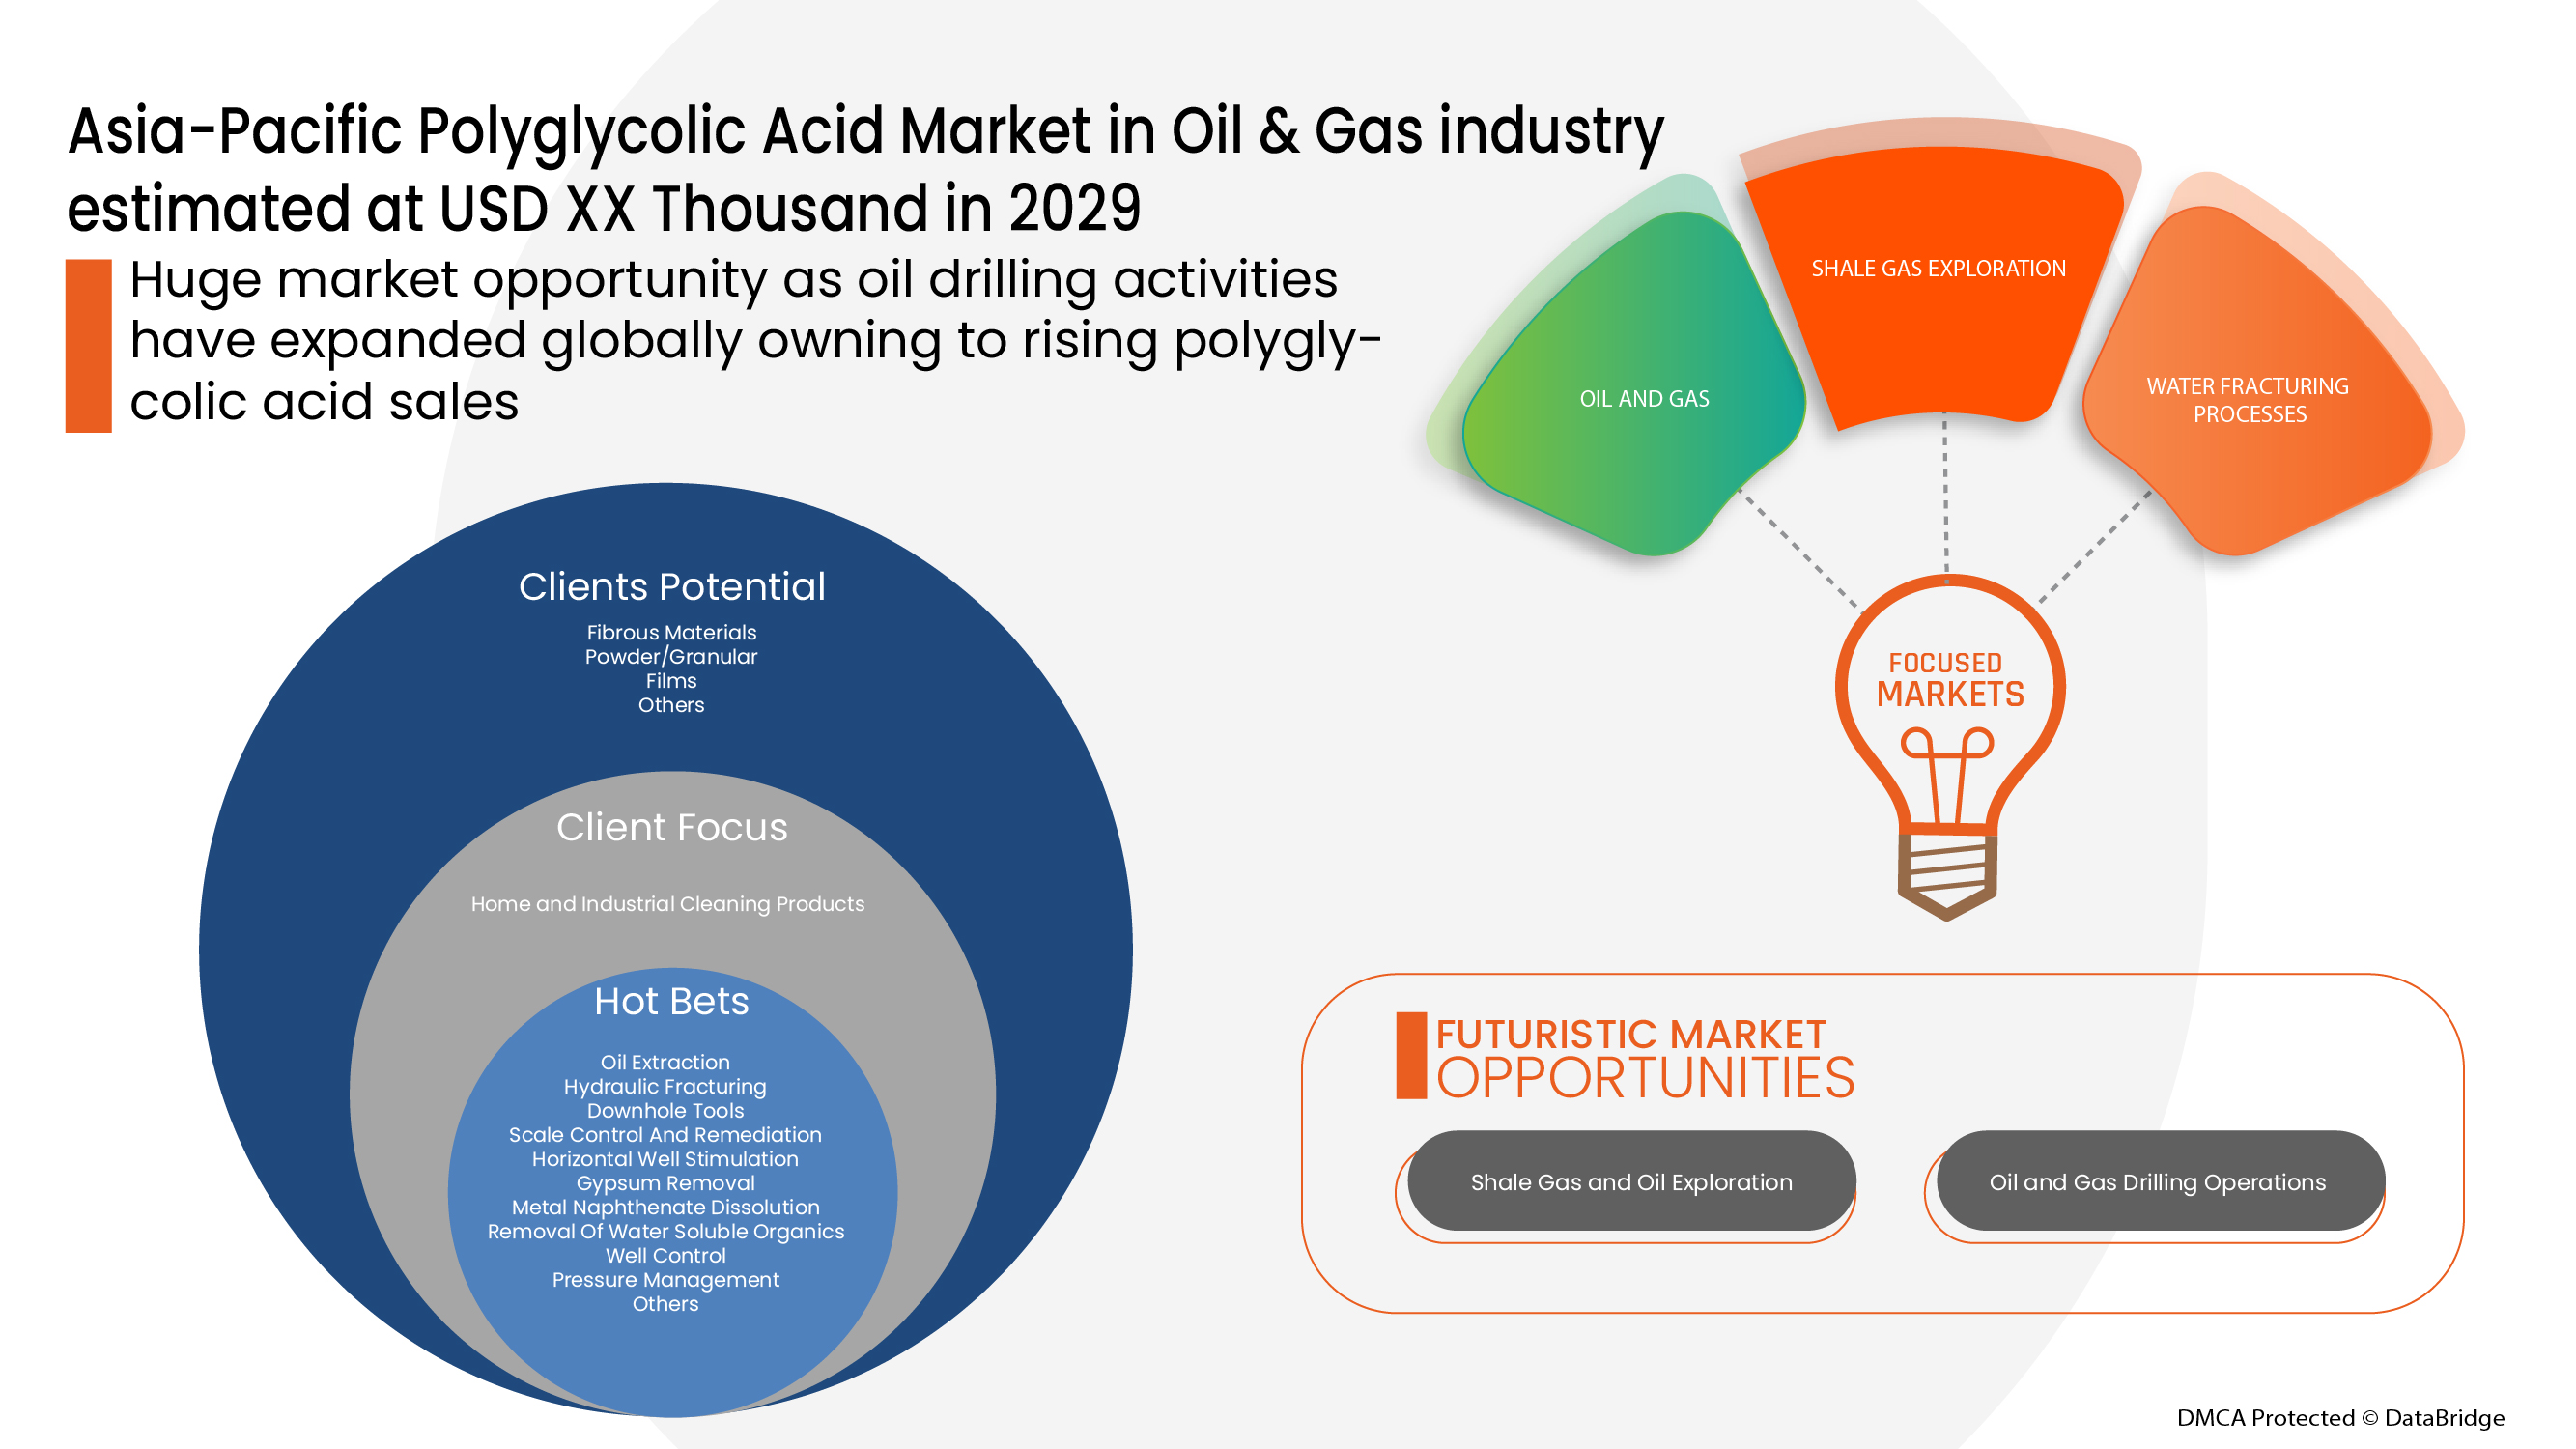 Asia-Pacific Polyglycolic Acid Market in Oil and Gas industry 